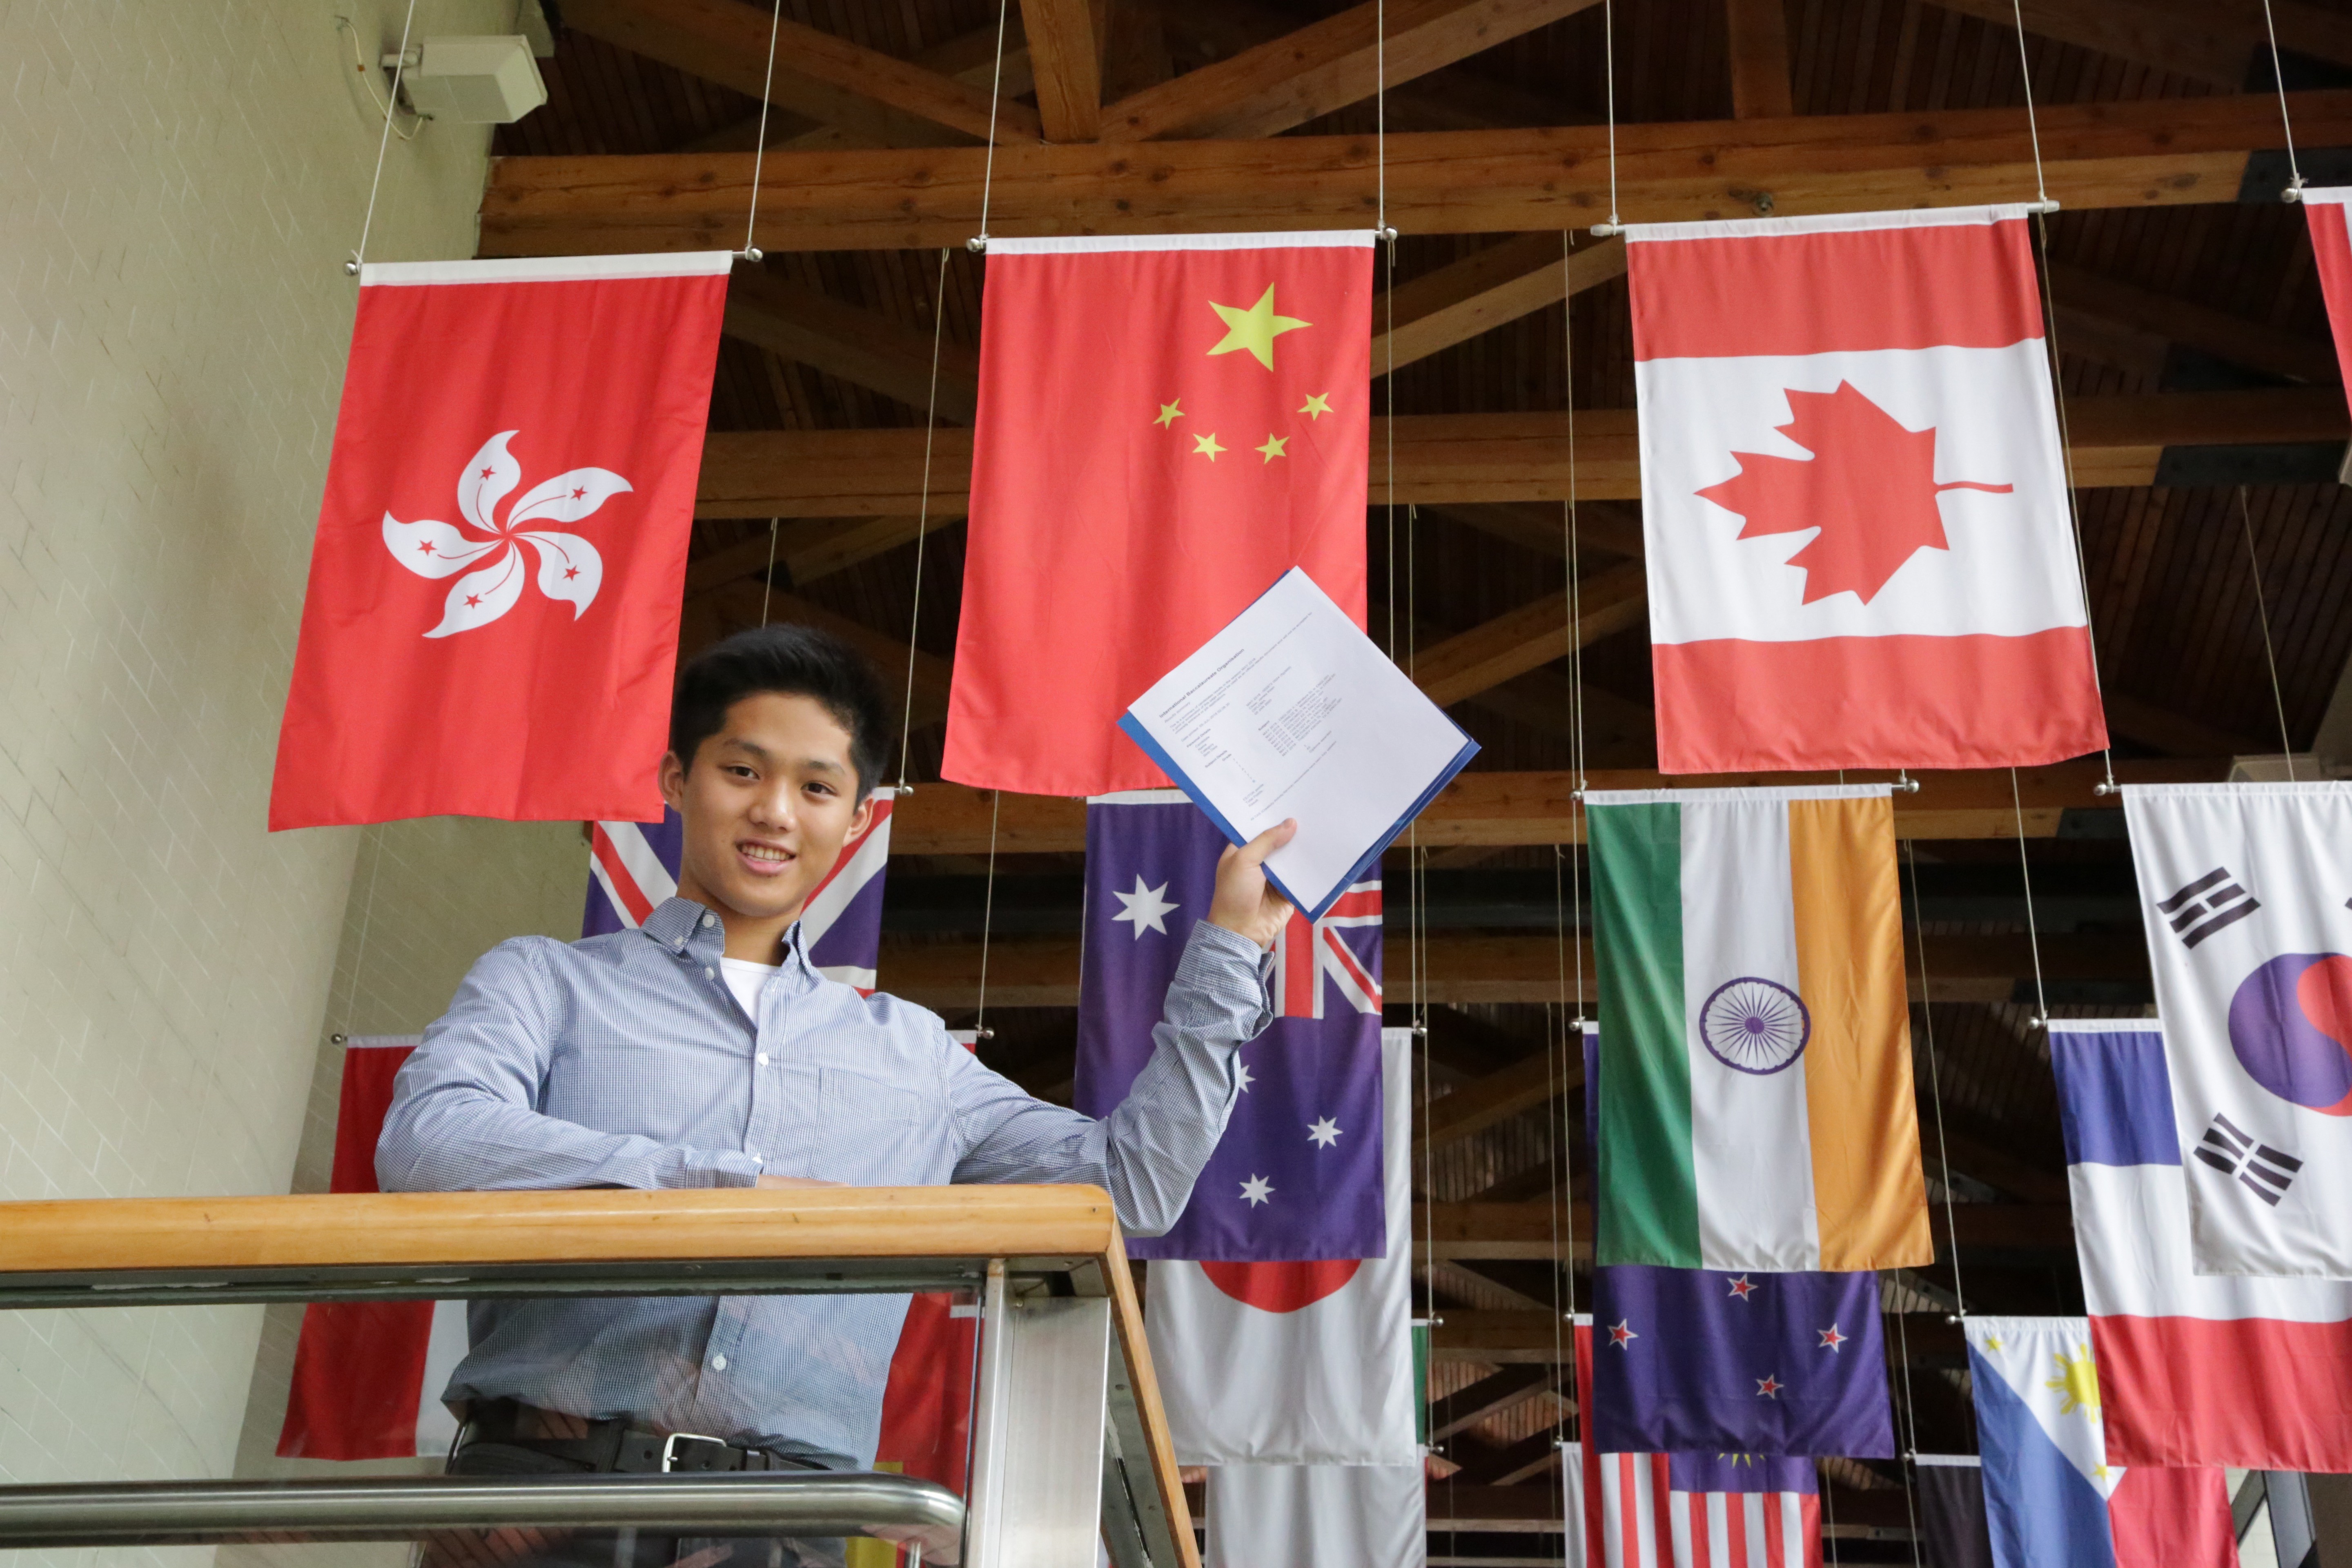 James Chow, of Canadian International School, described the IB programme as “the most difficult time of my studies here”. Photo: Handout